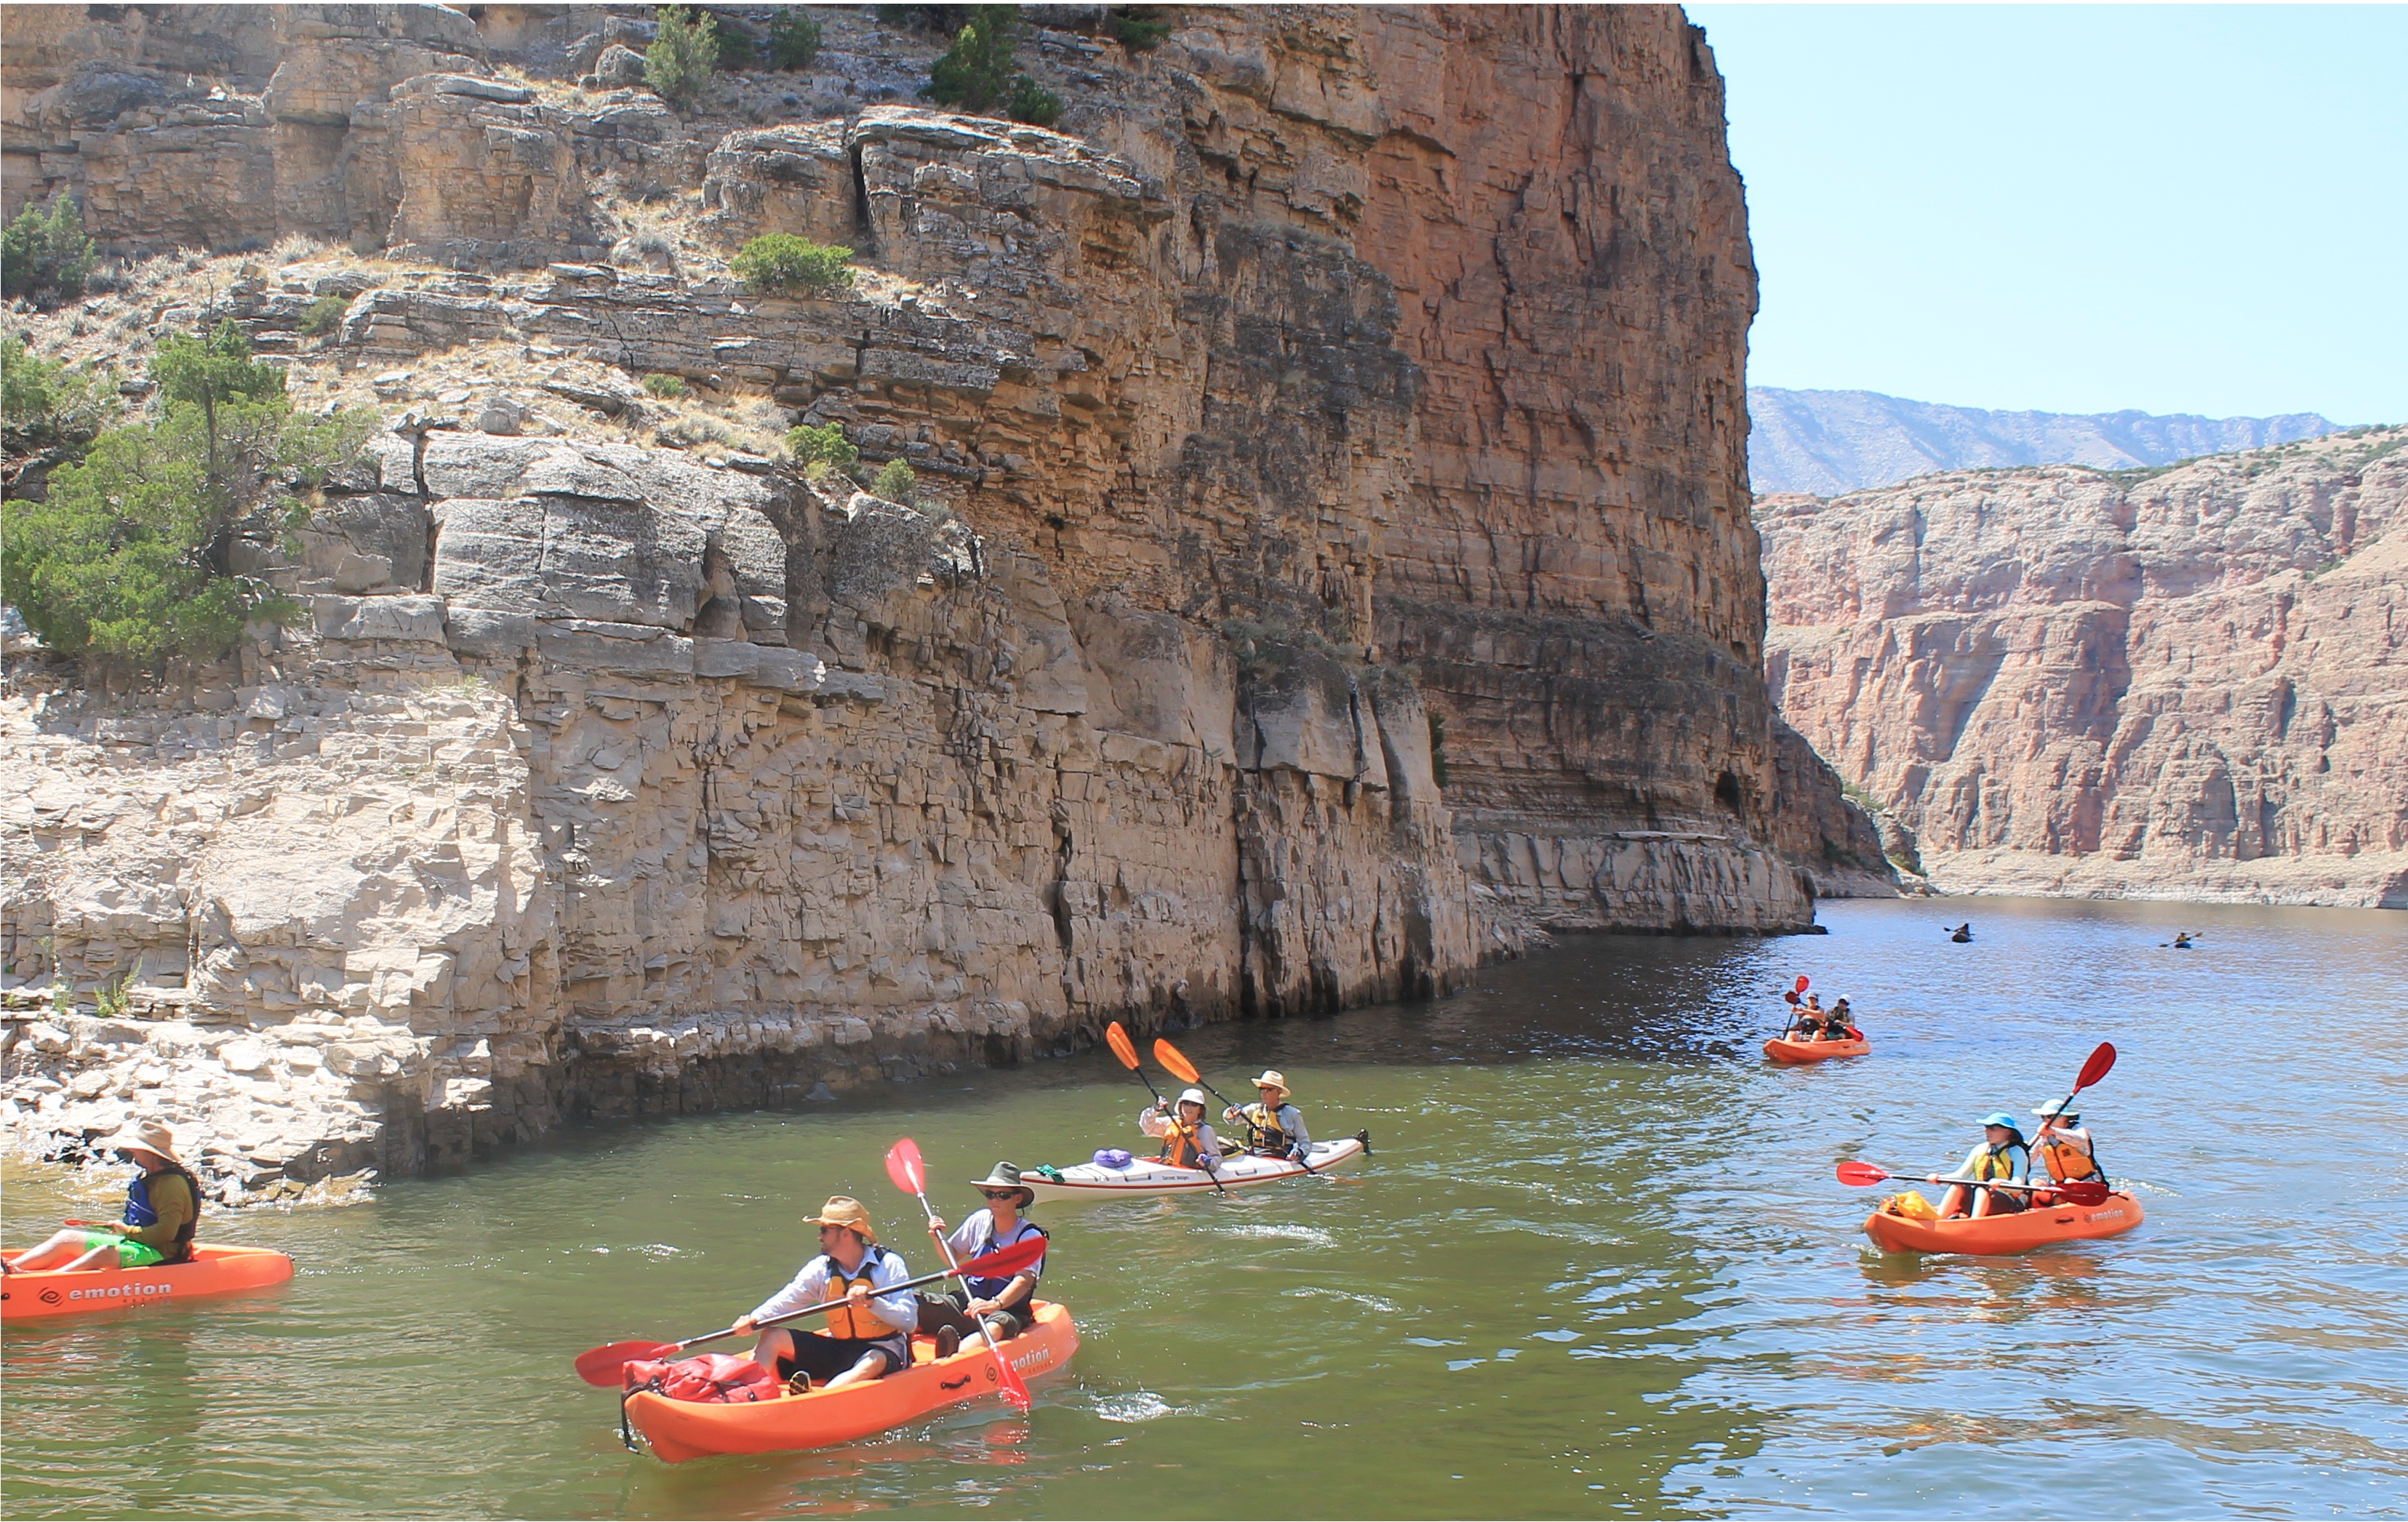 7 Kayaks with 11 people paddling up river in Bighorn Canyon.